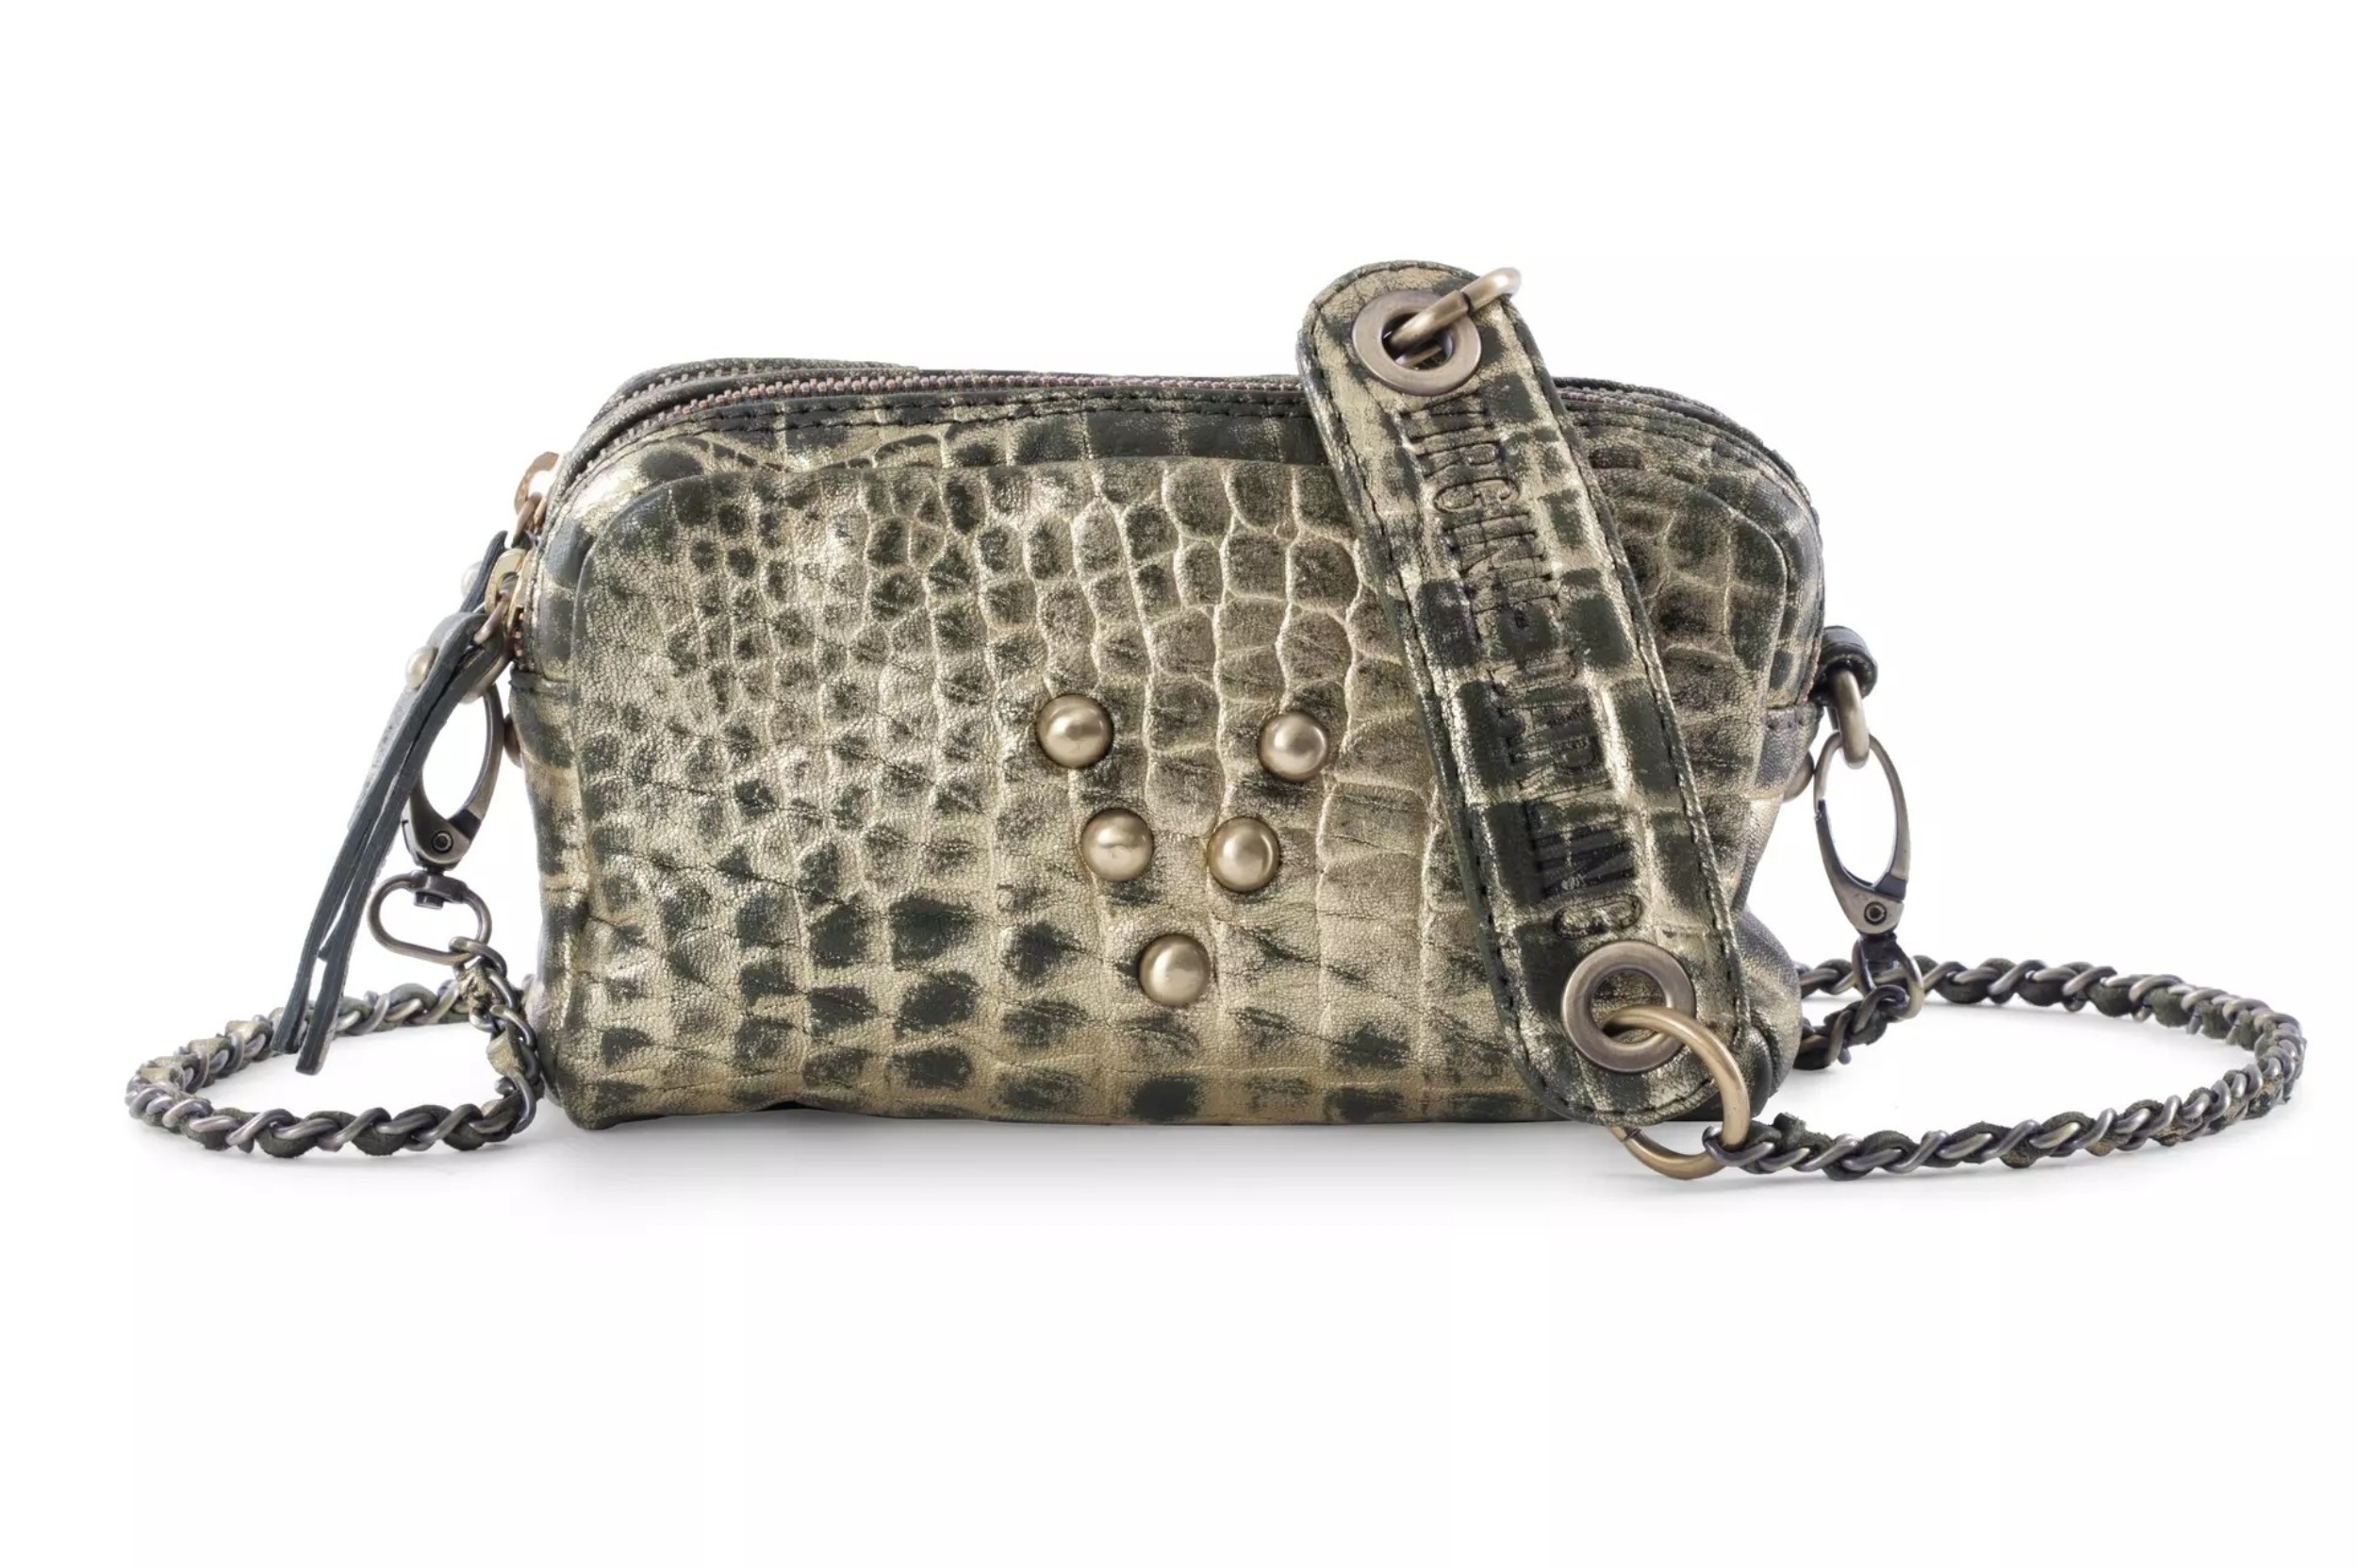 Sac Trousse Make Me Up Bubble Spinash Croco - VIRGINIE DARLING